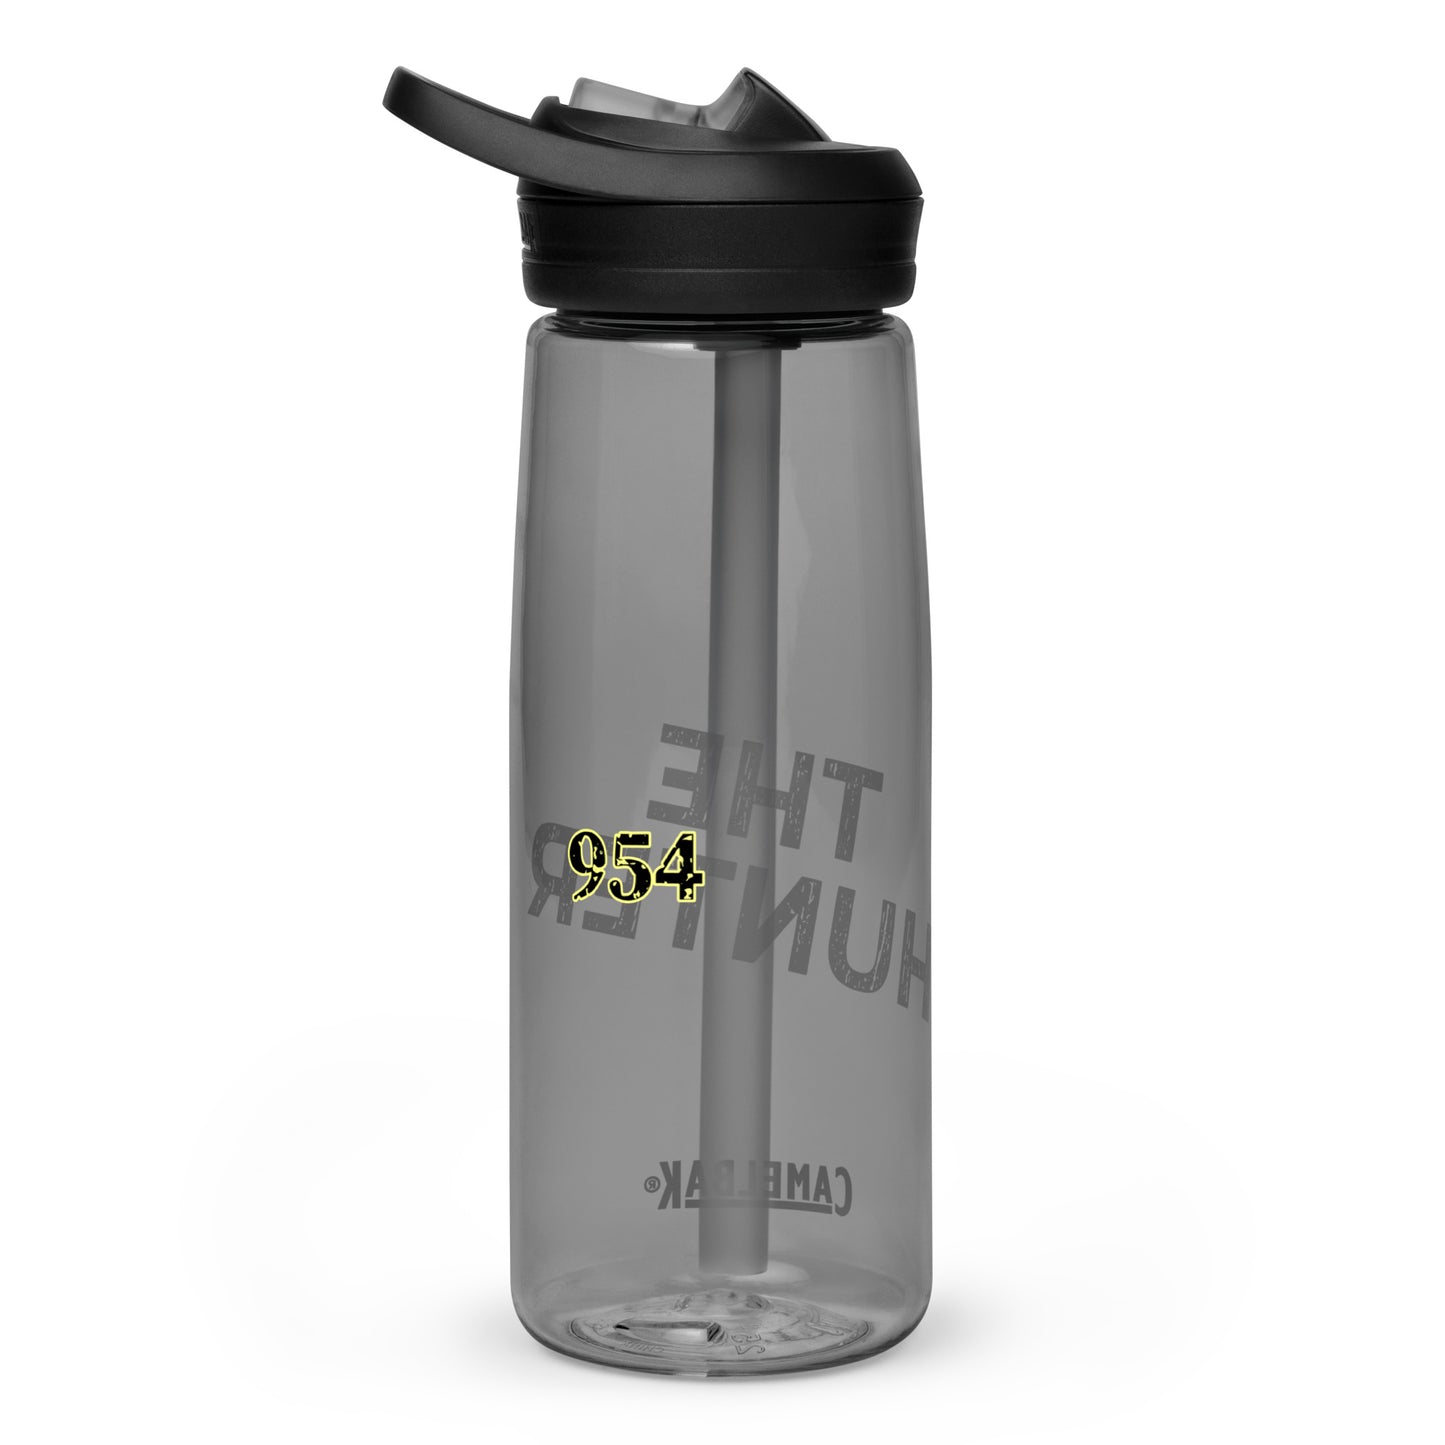 The Hunter 954 Signature Sports water bottle